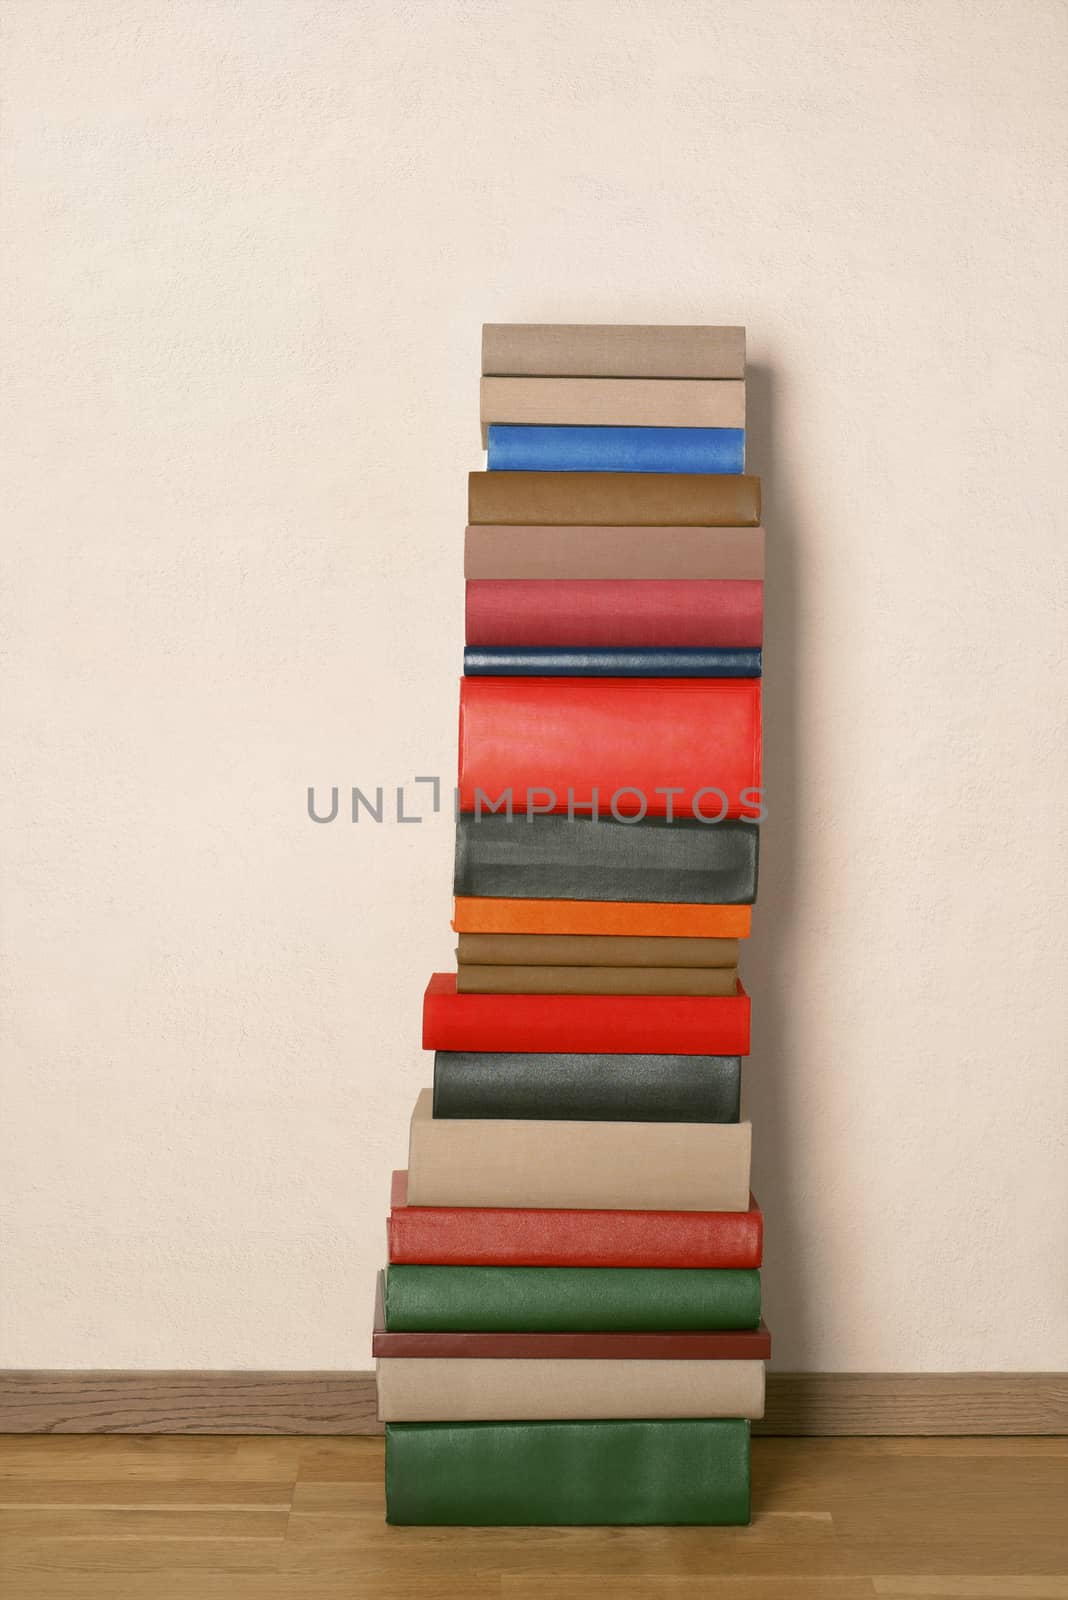 Old colorful books on wooden floor near the white wall